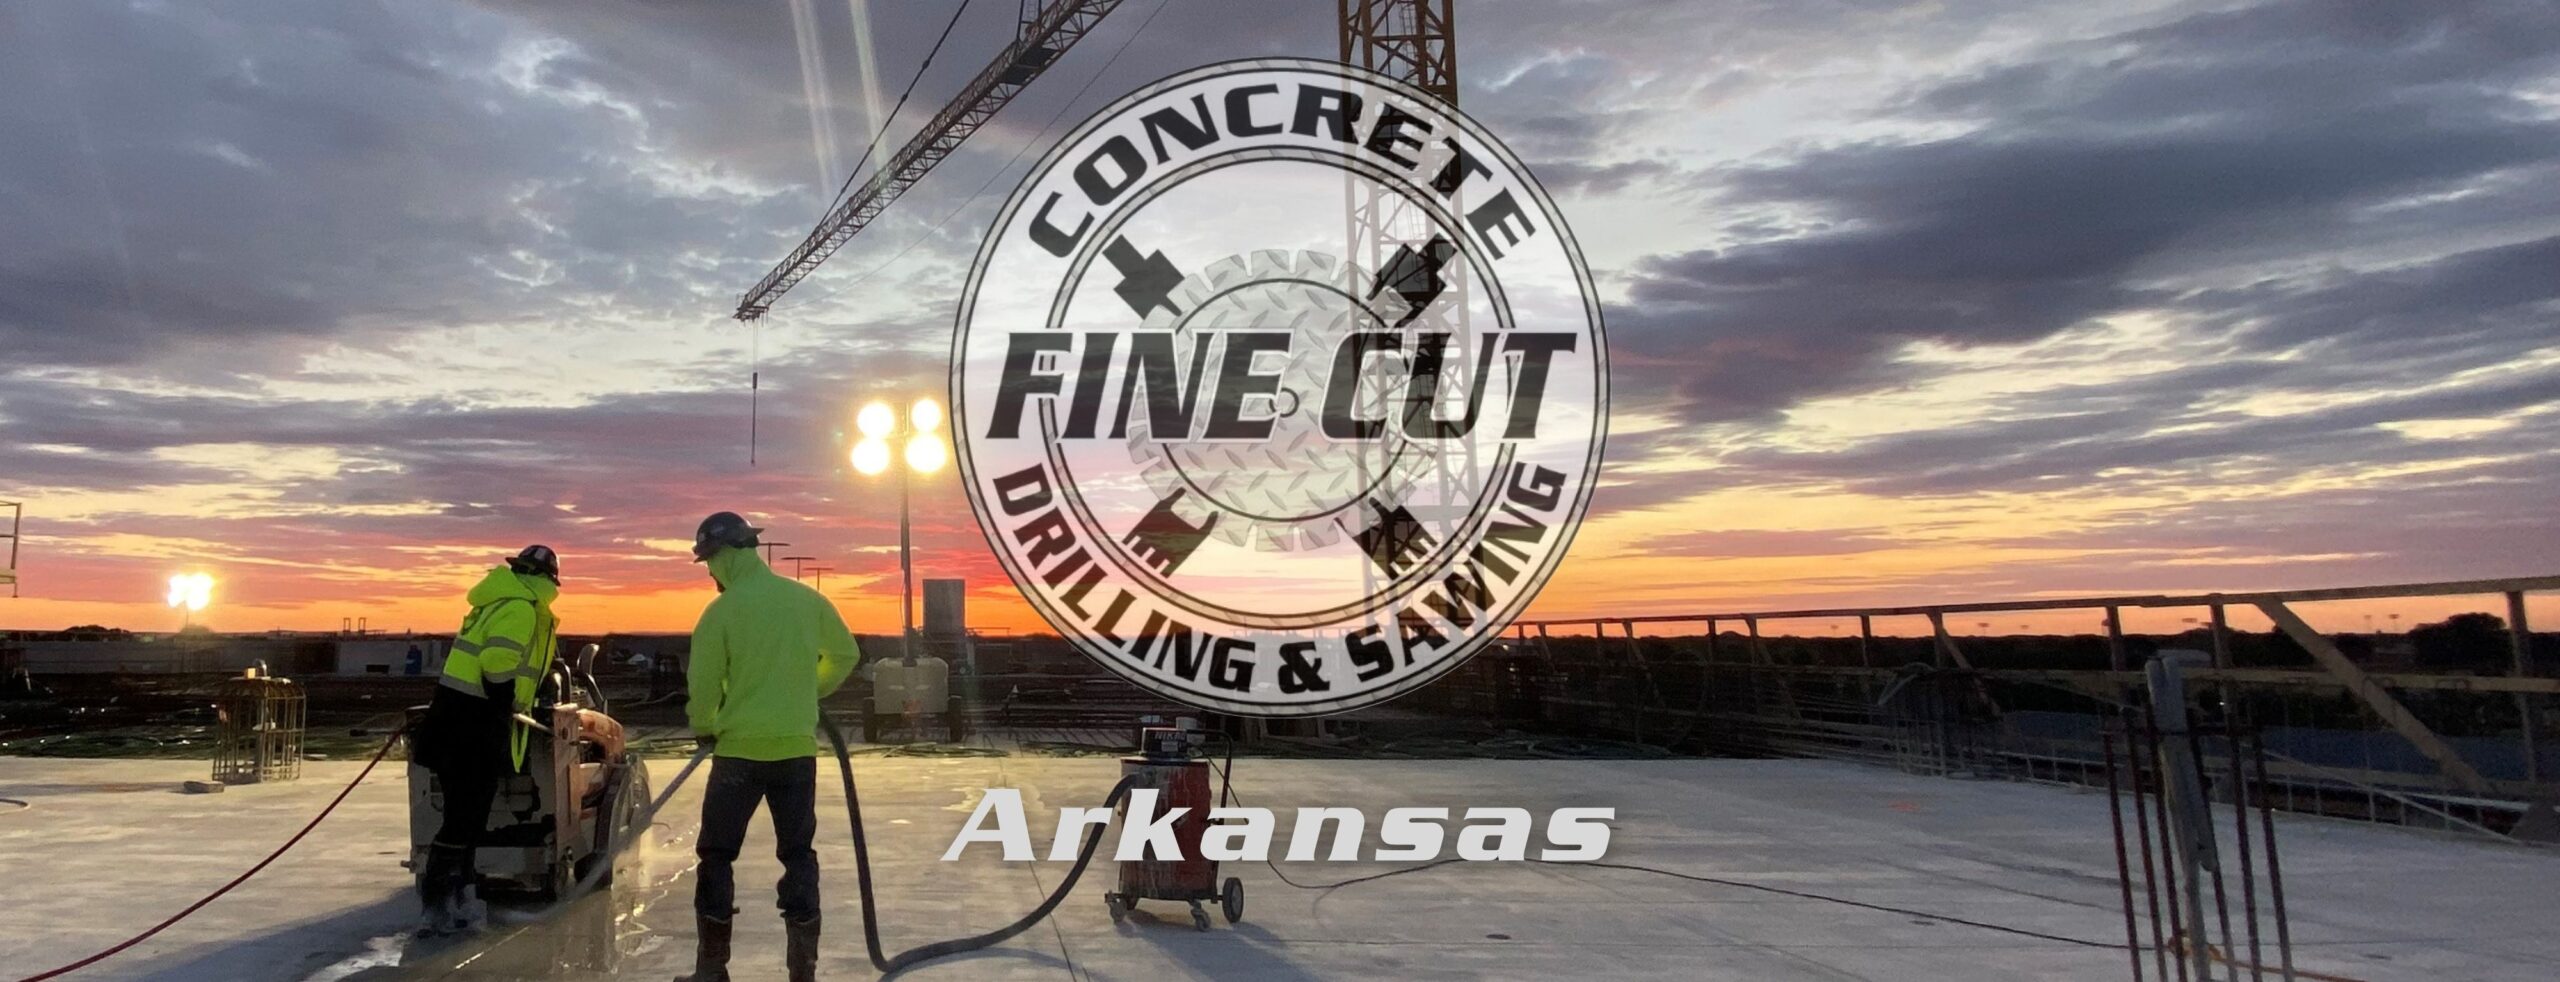 concrete cutting bentonville arkansas cover page image with sunset in background